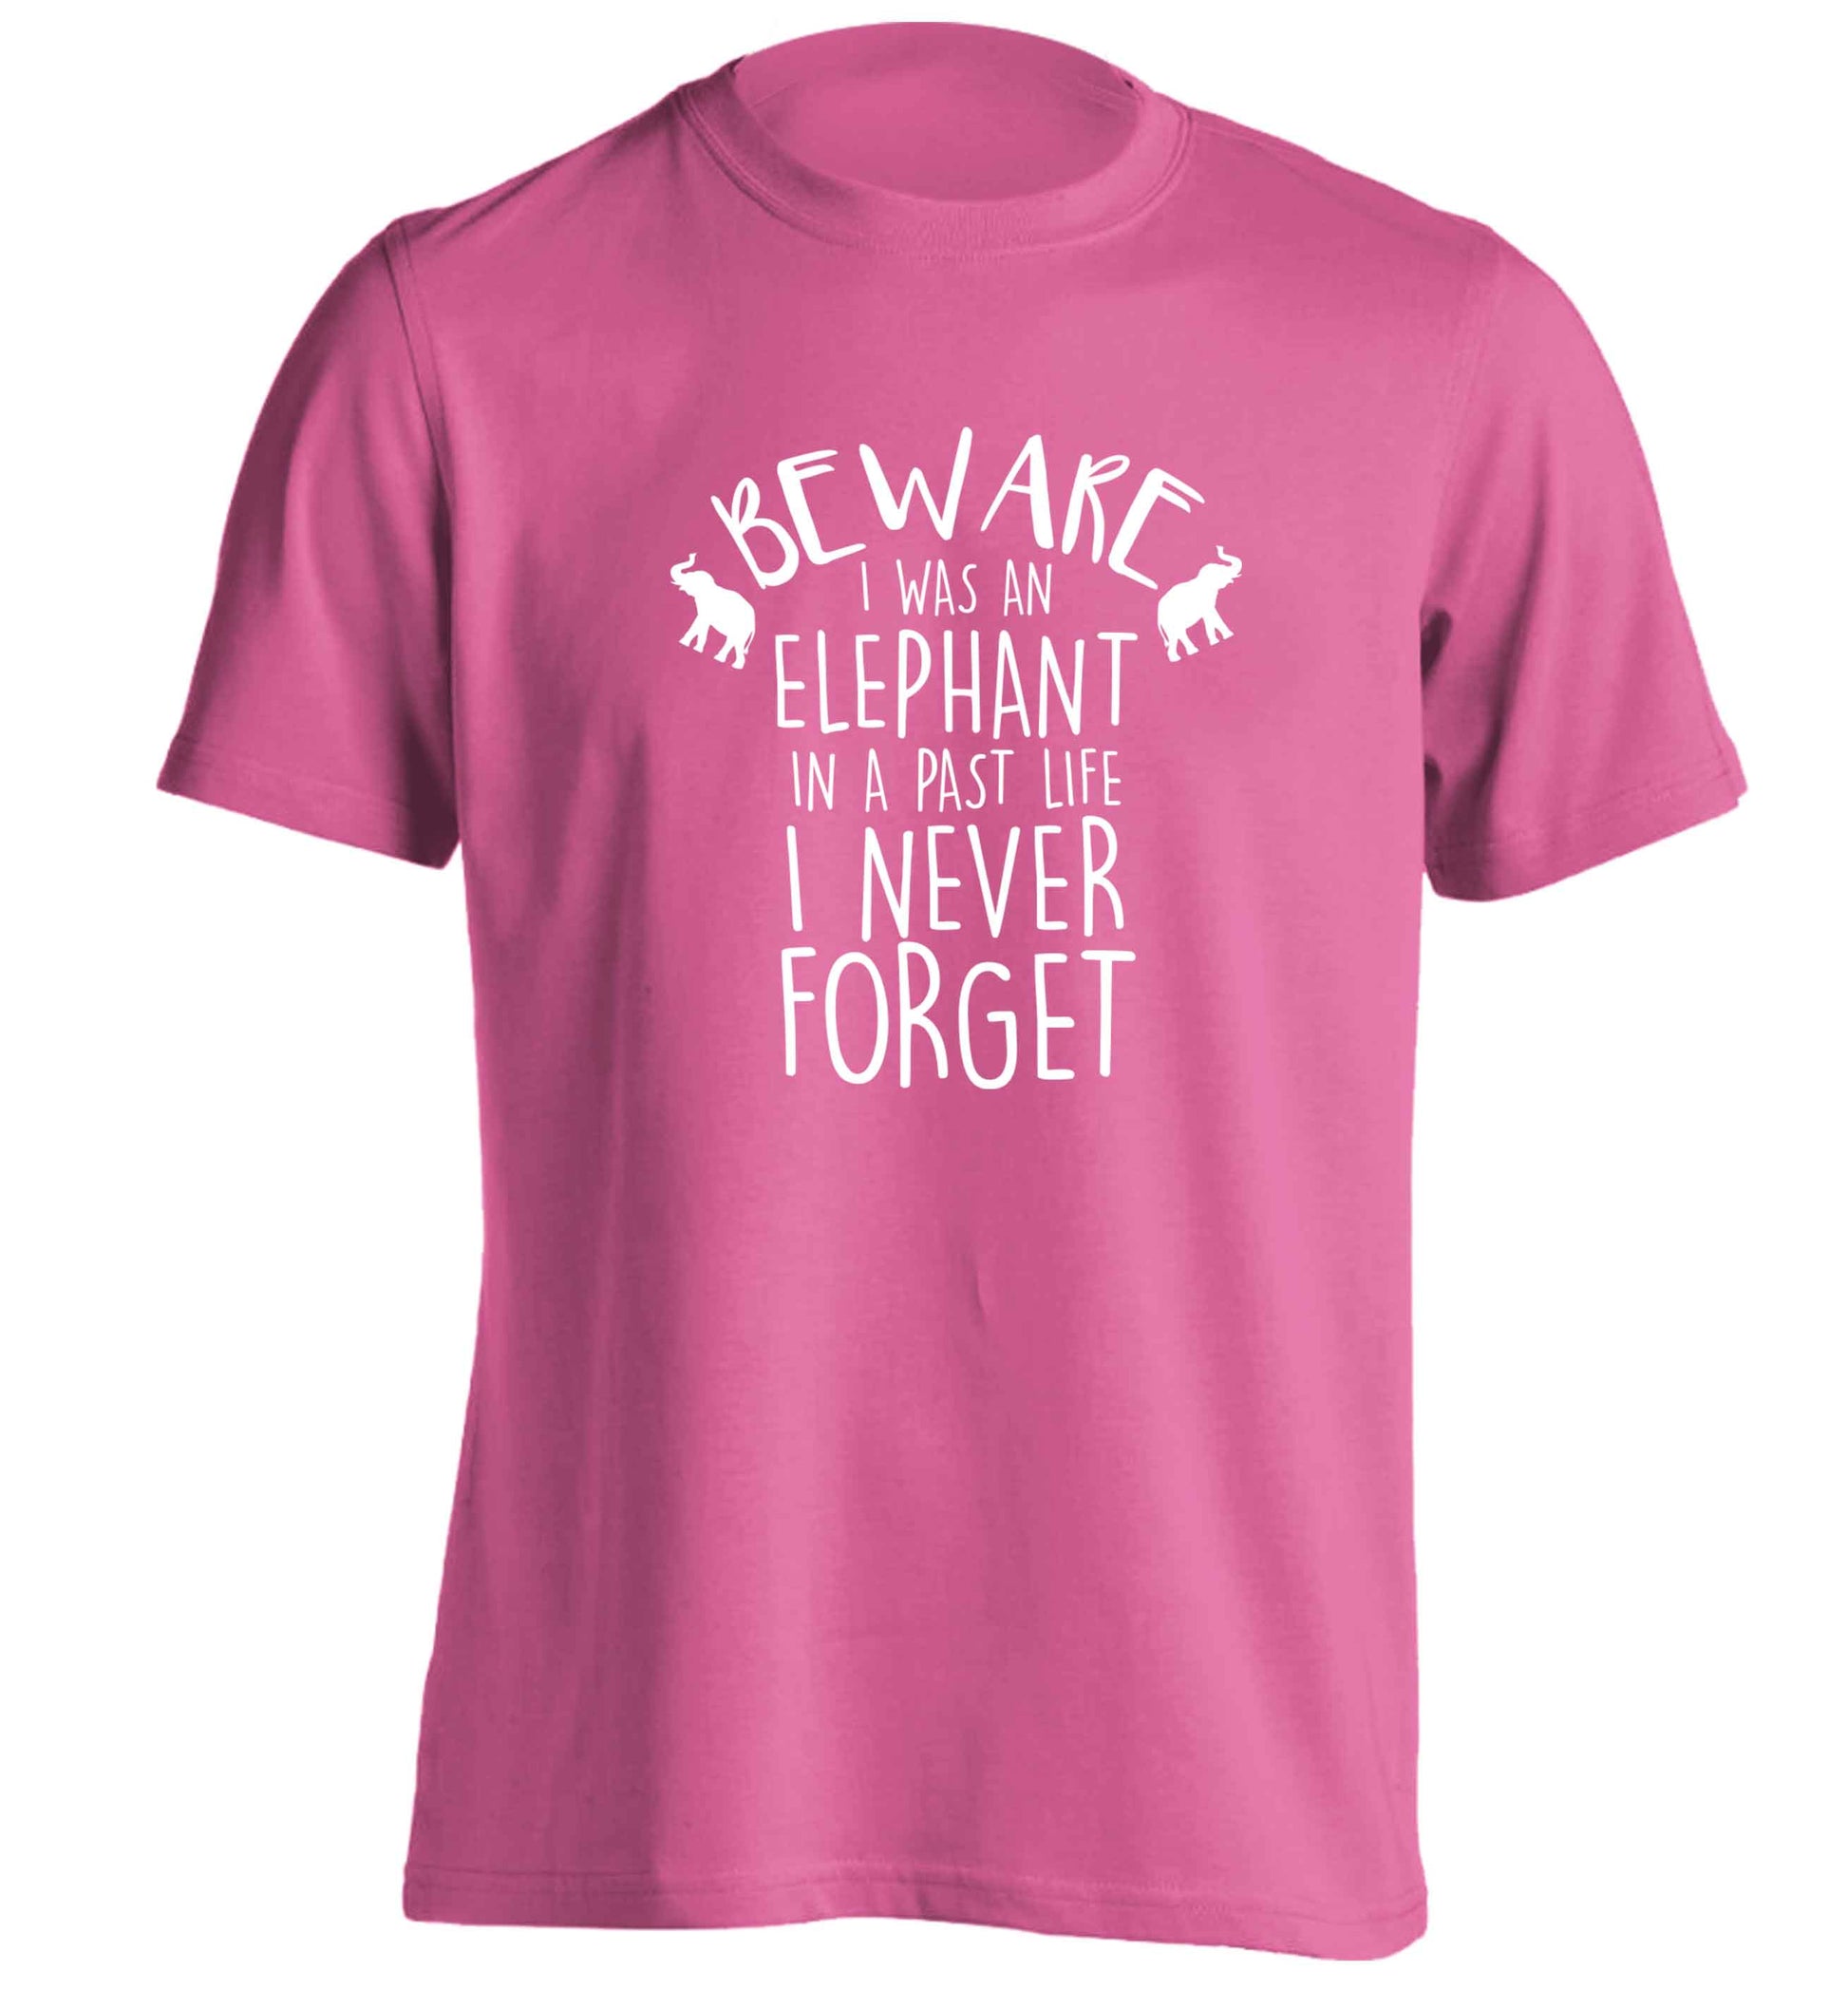 Beware I was an elephant in my past life I never forget adults unisex pink Tshirt 2XL